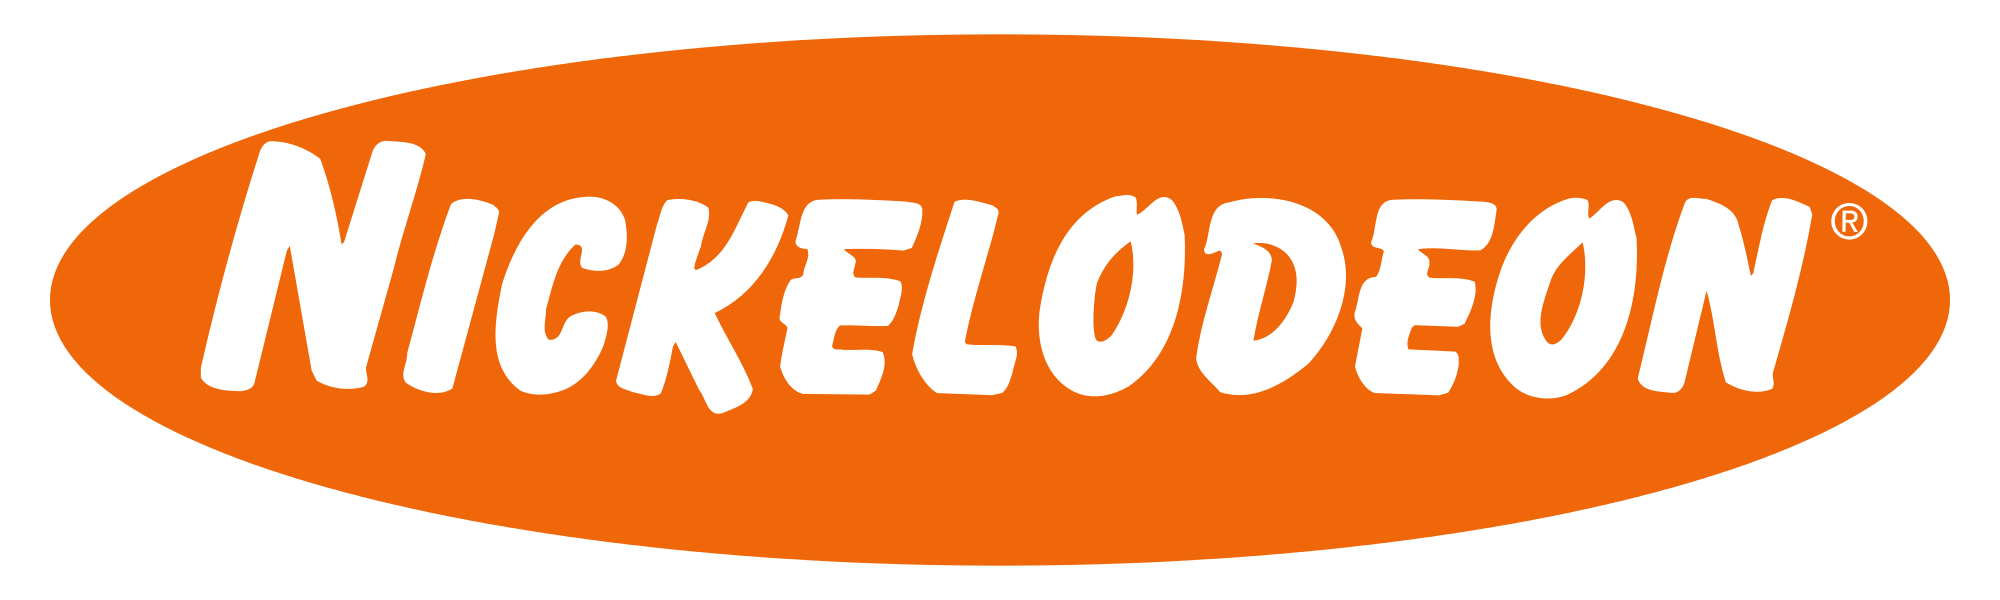 Old Nickelodeon Logo - Nickelodeon Logo, Nickelodeon Symbol Meaning, History and Evolution